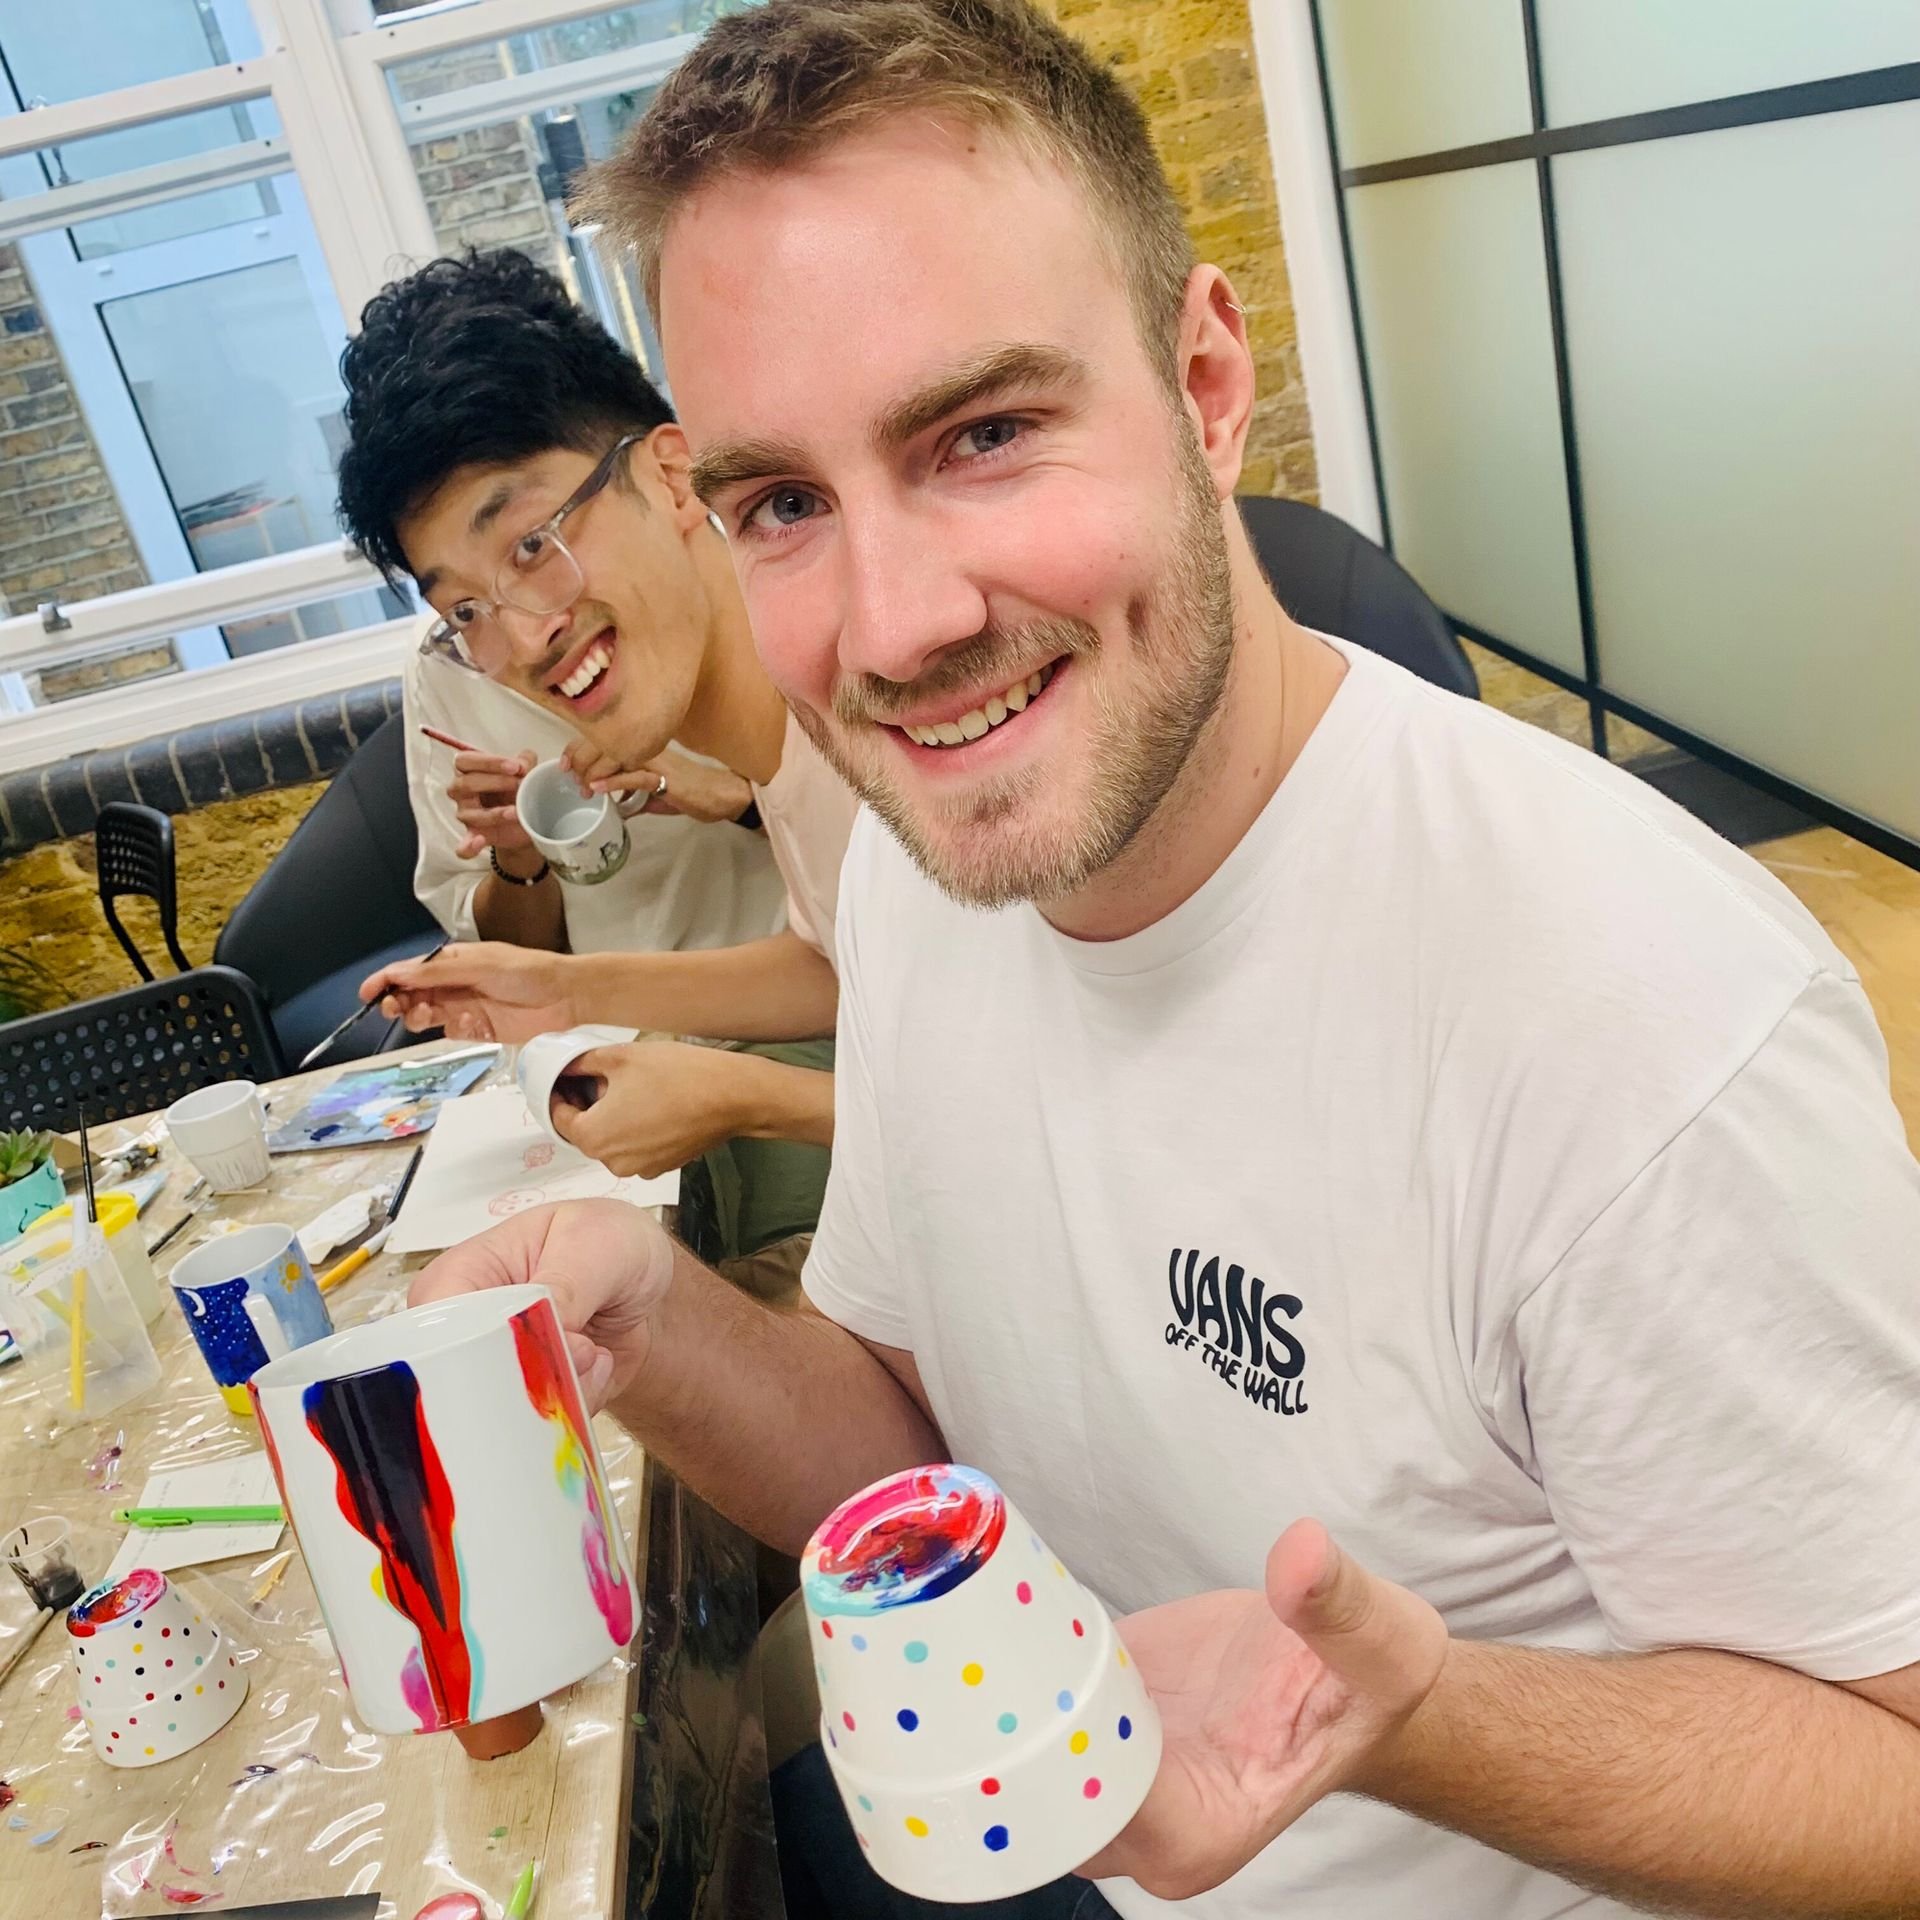 Ceramic Painting Team Building Activity Come to Office The crafty Hen.jpeg